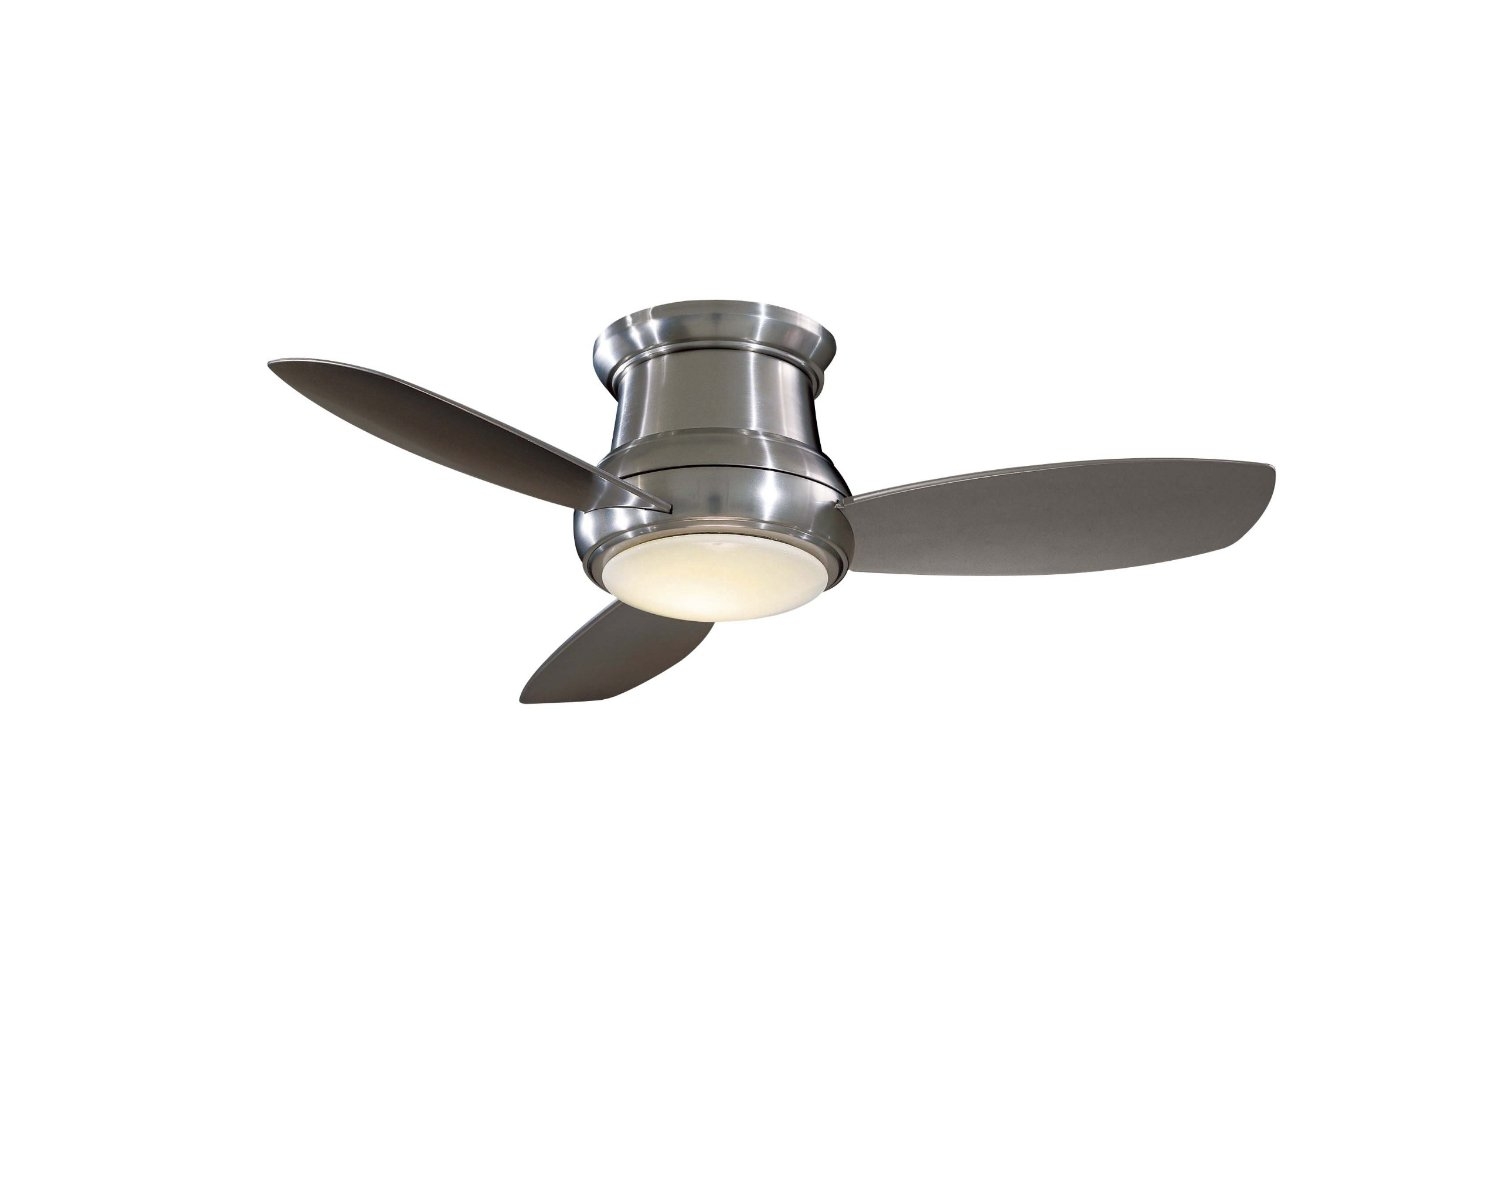 Small Hugger Ceiling Fans With Light1500 X 1198